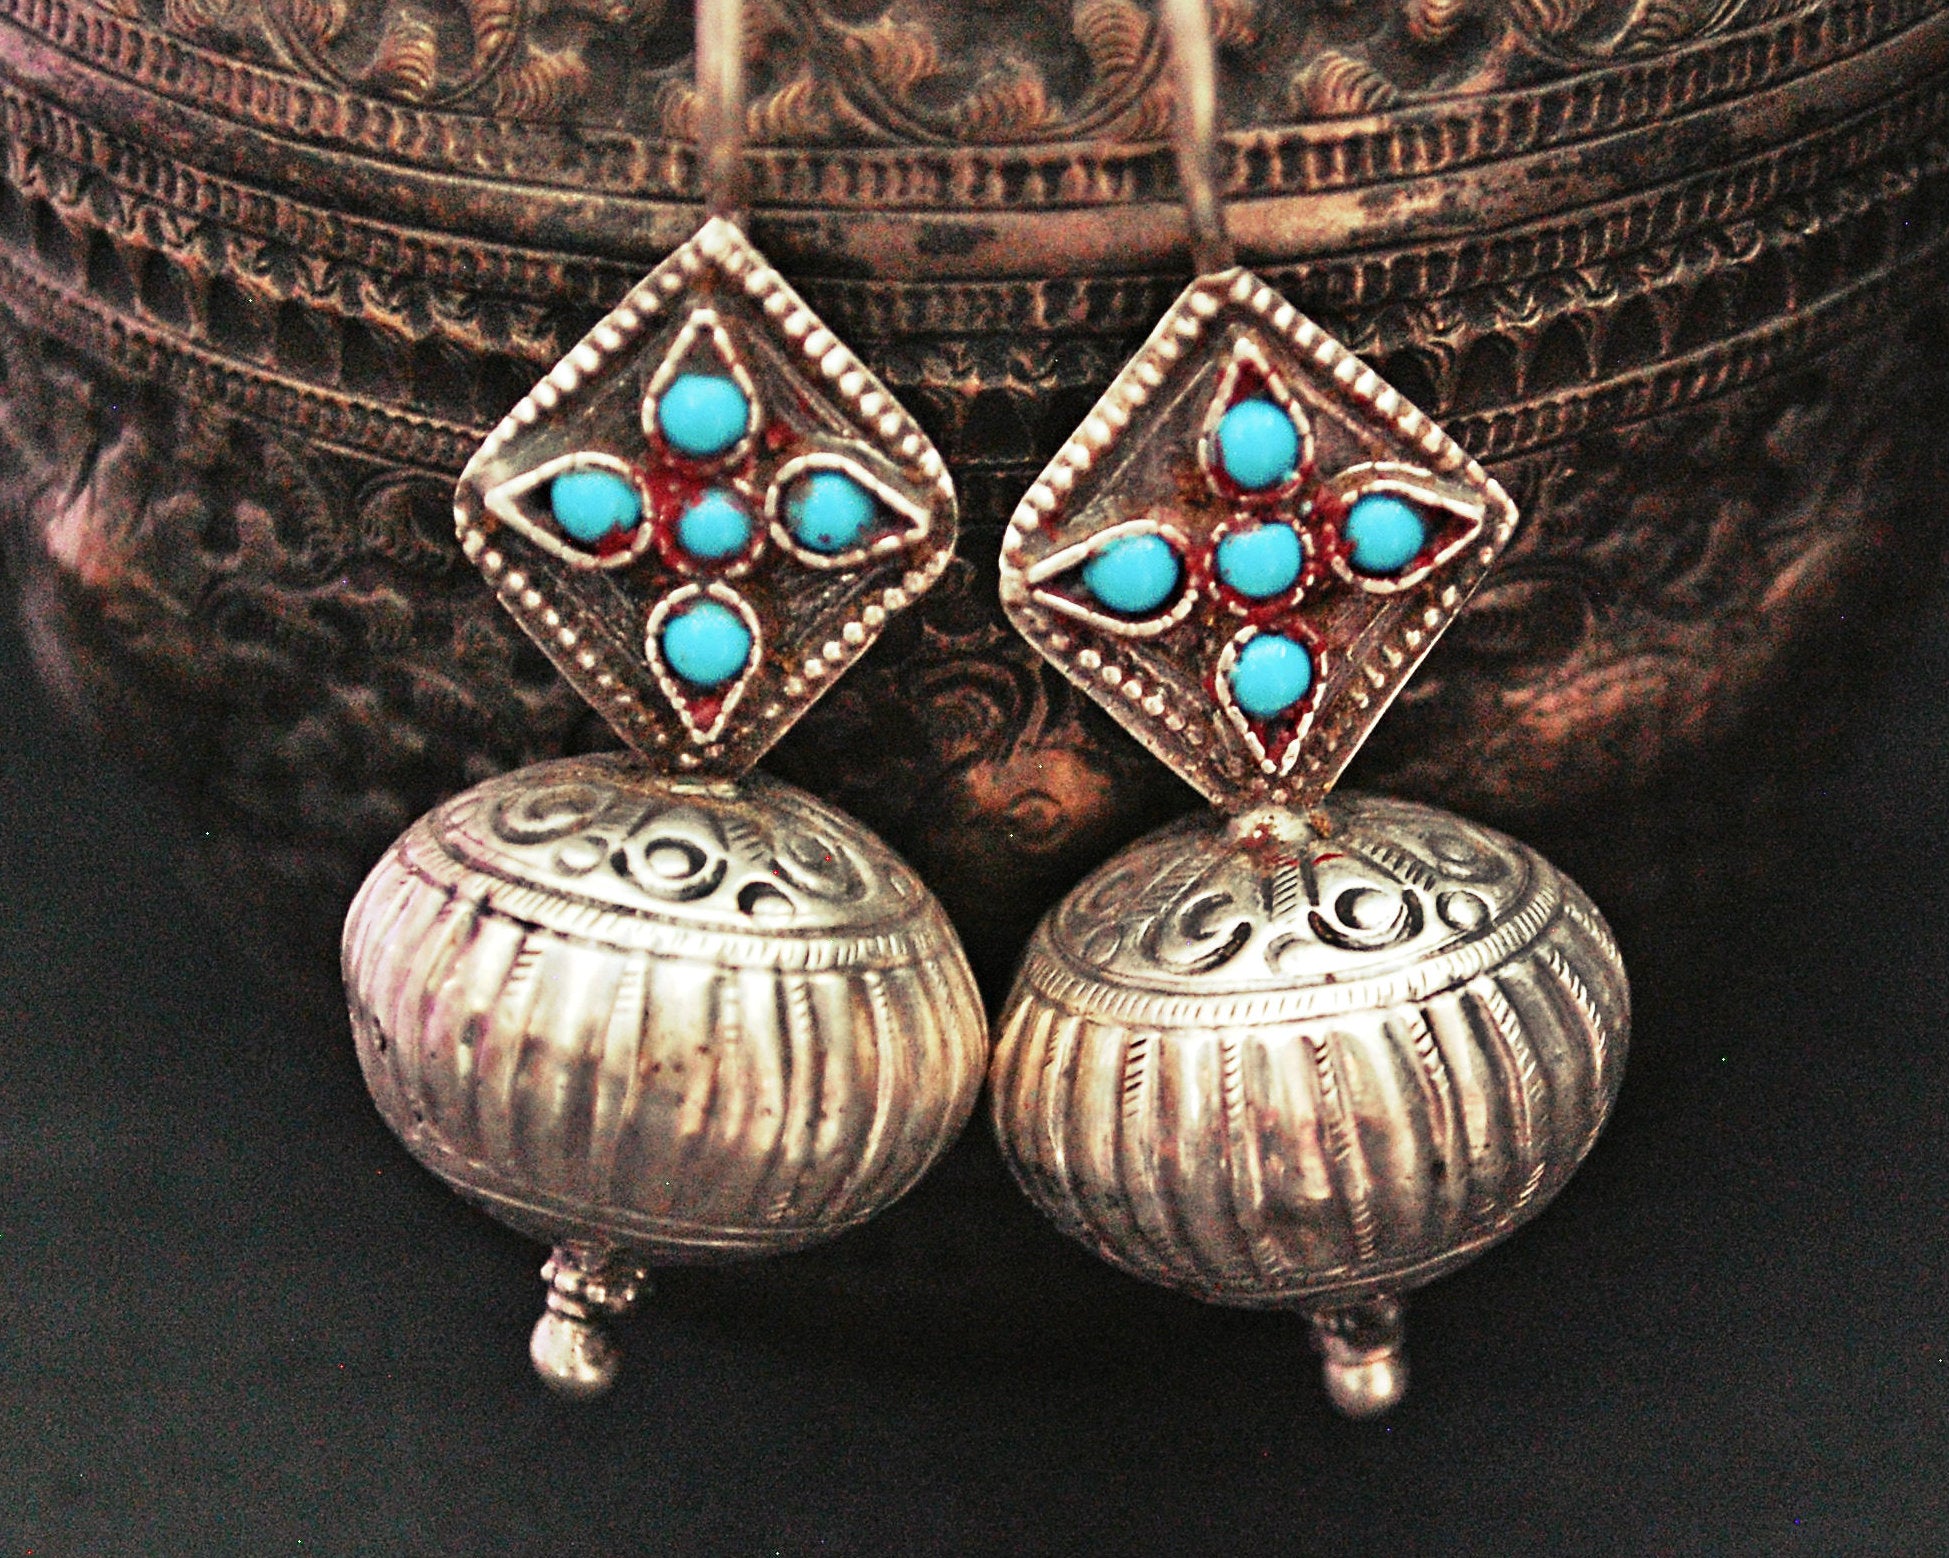 Antique Afghani Turquoise Earrings